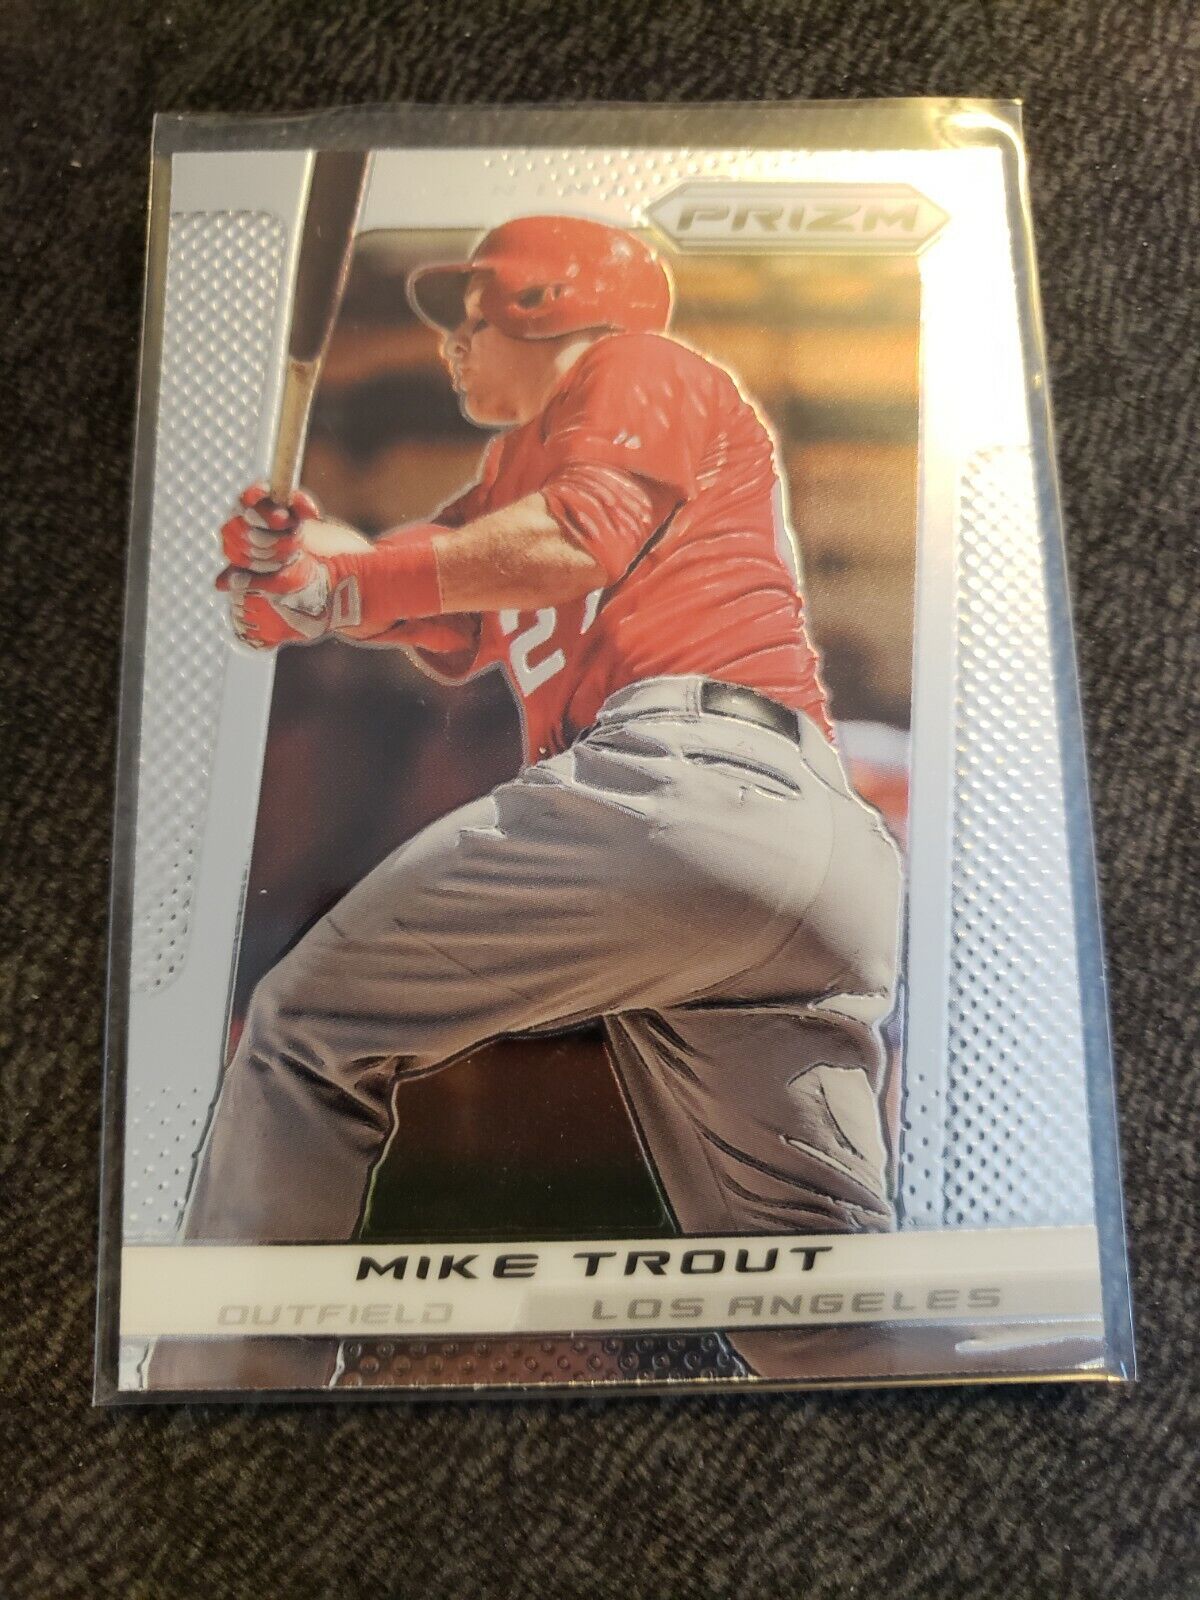 2013 Panini Prizm Mike Trout #159, Los Angeles Angels